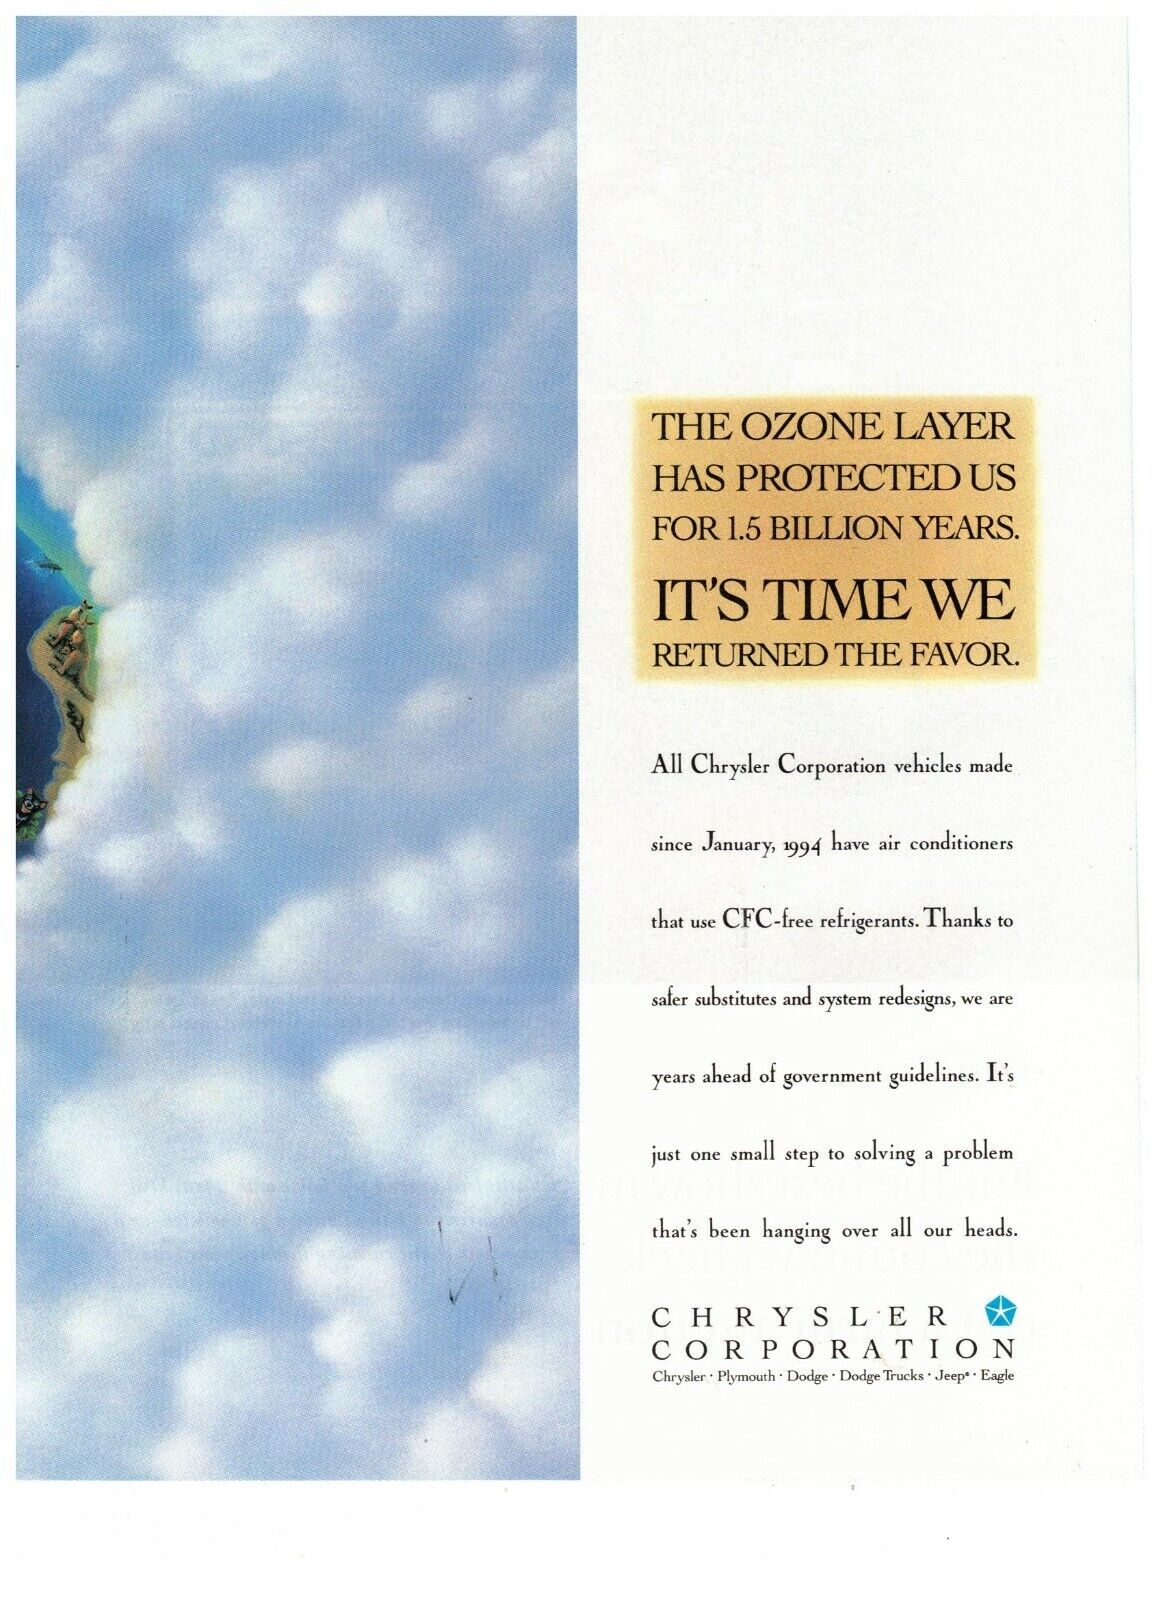 Chrysler Corporation Ozone Layer Double Page 1994 Vintage Print Advertisement